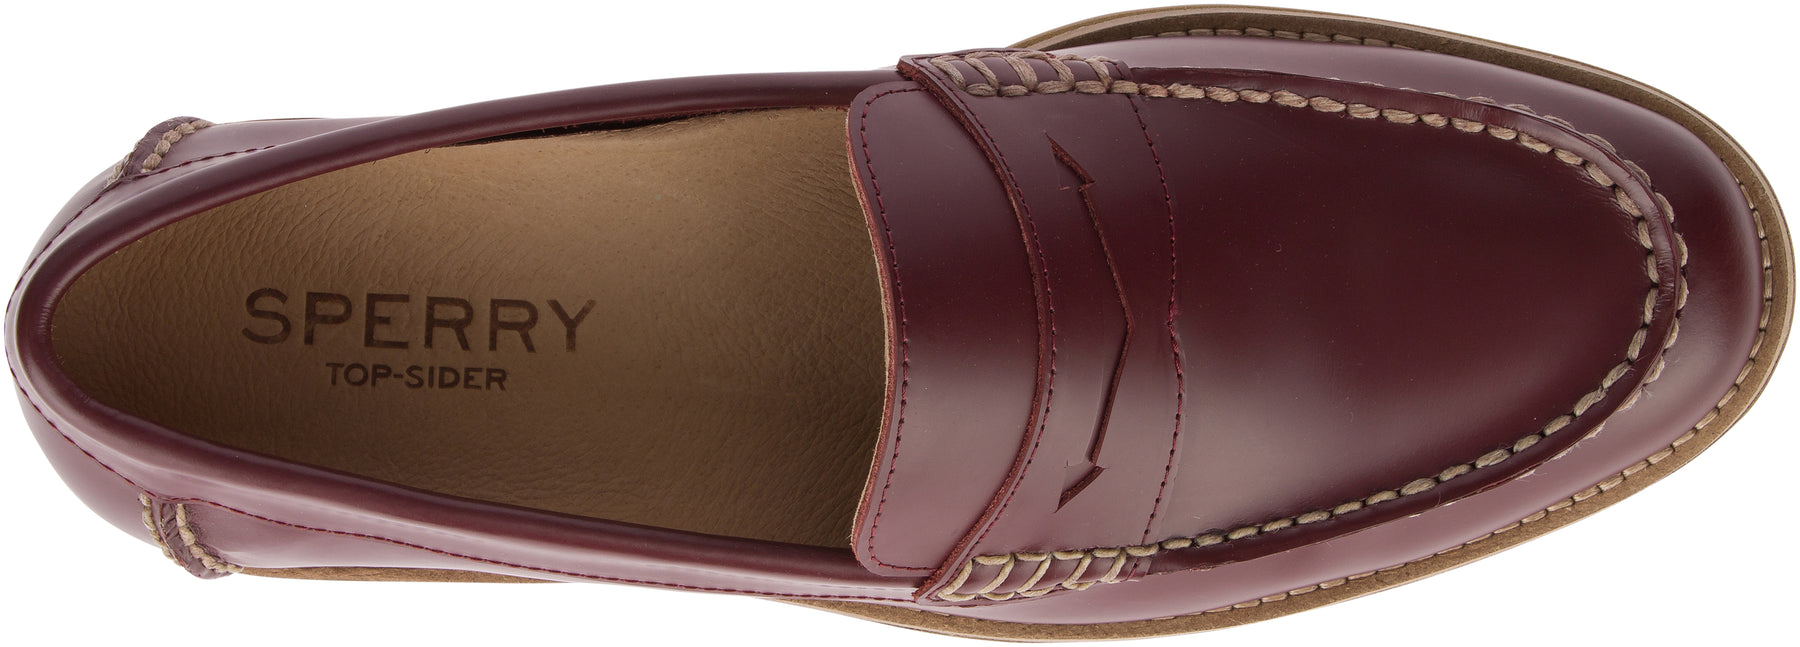 Men's Topsfield Penny Loafer Burgundy Casual (STS21472)